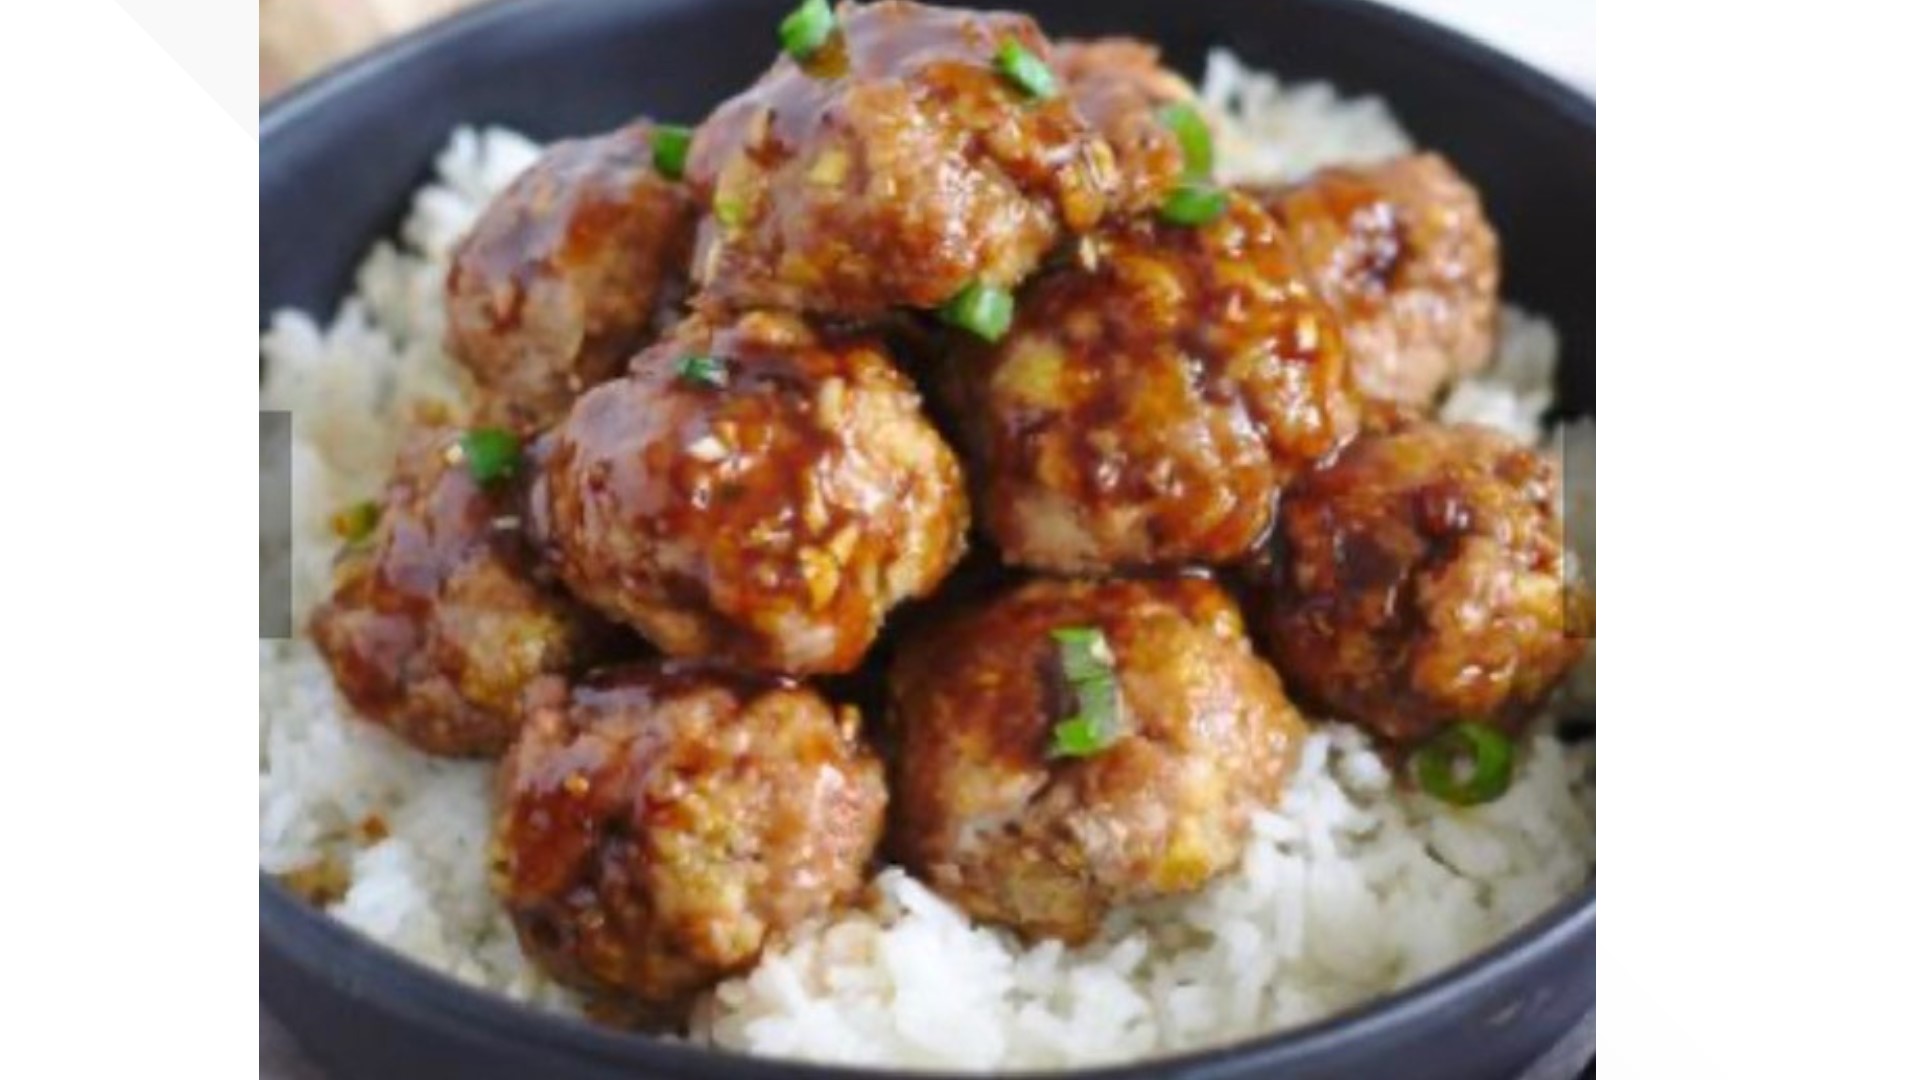 Chef Kevin has some Asian meatballs you can serve over rice and meatball bites.